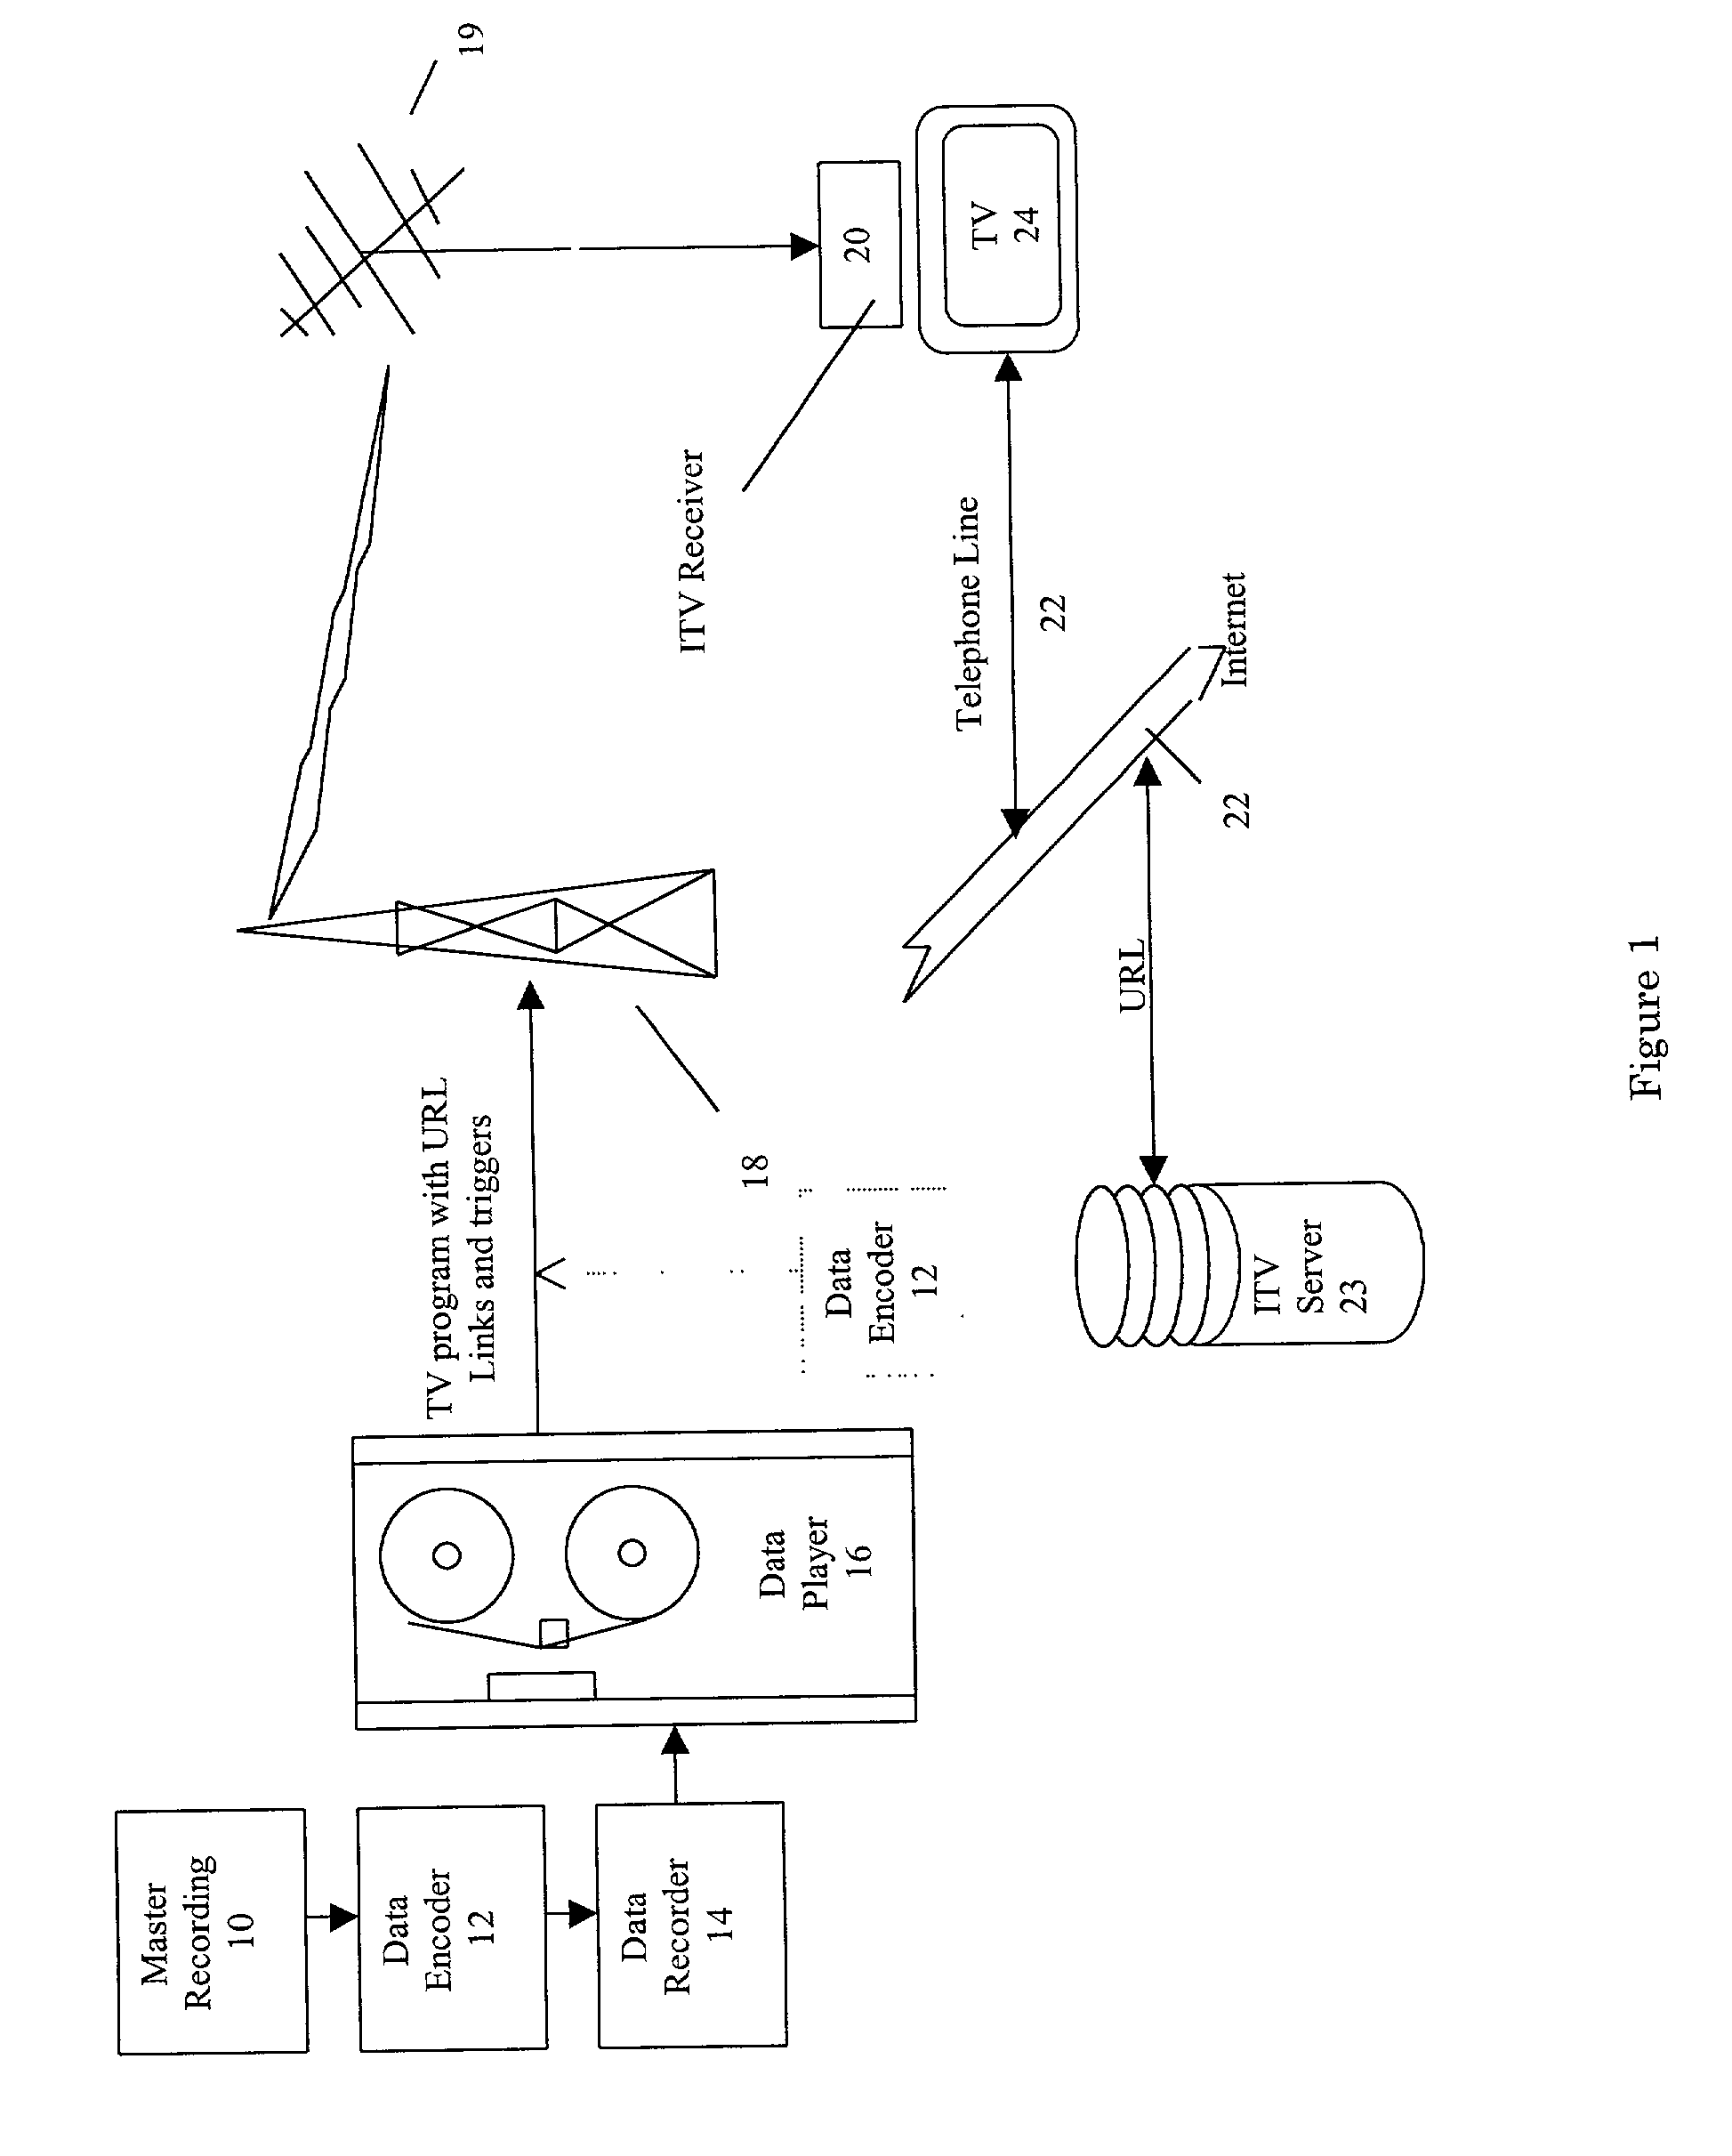 System and method for interacting with users over a communications network